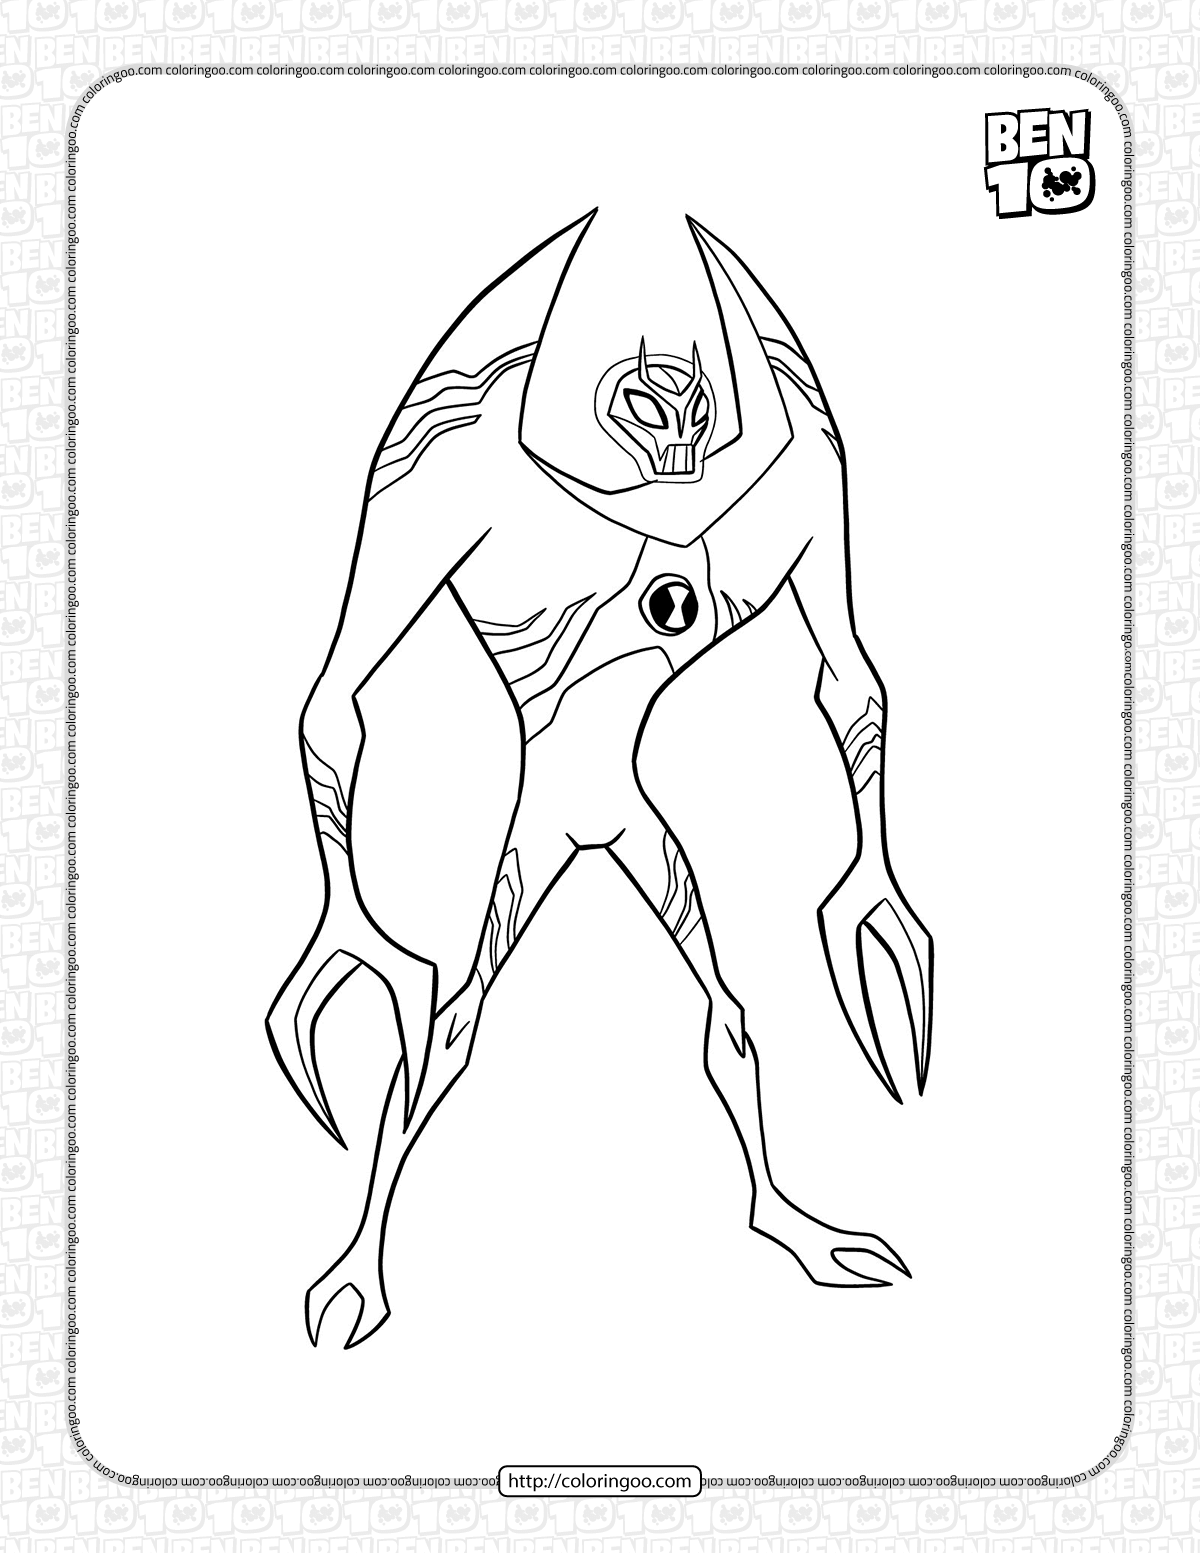 lodestar omniverse classic coloring page